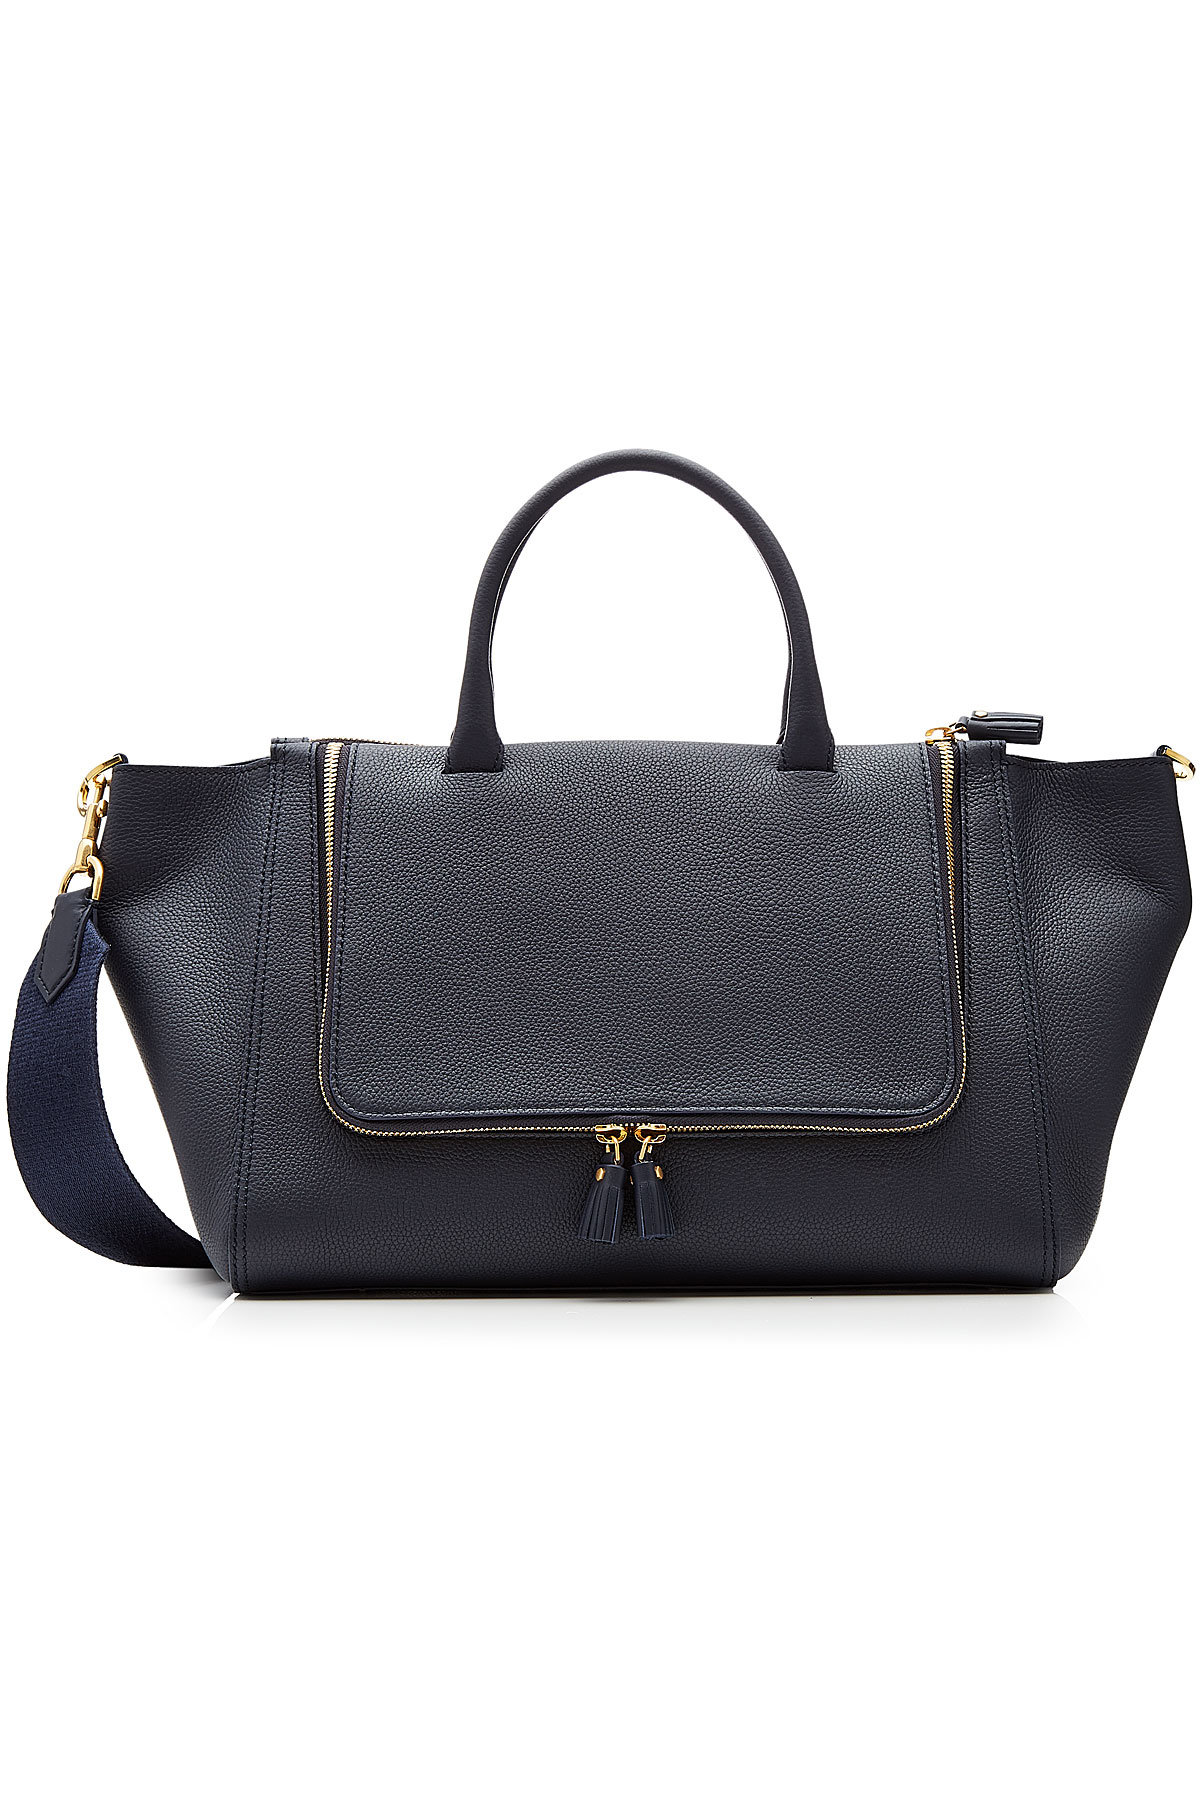 Anya Hindmarch - Vere Leather Tote